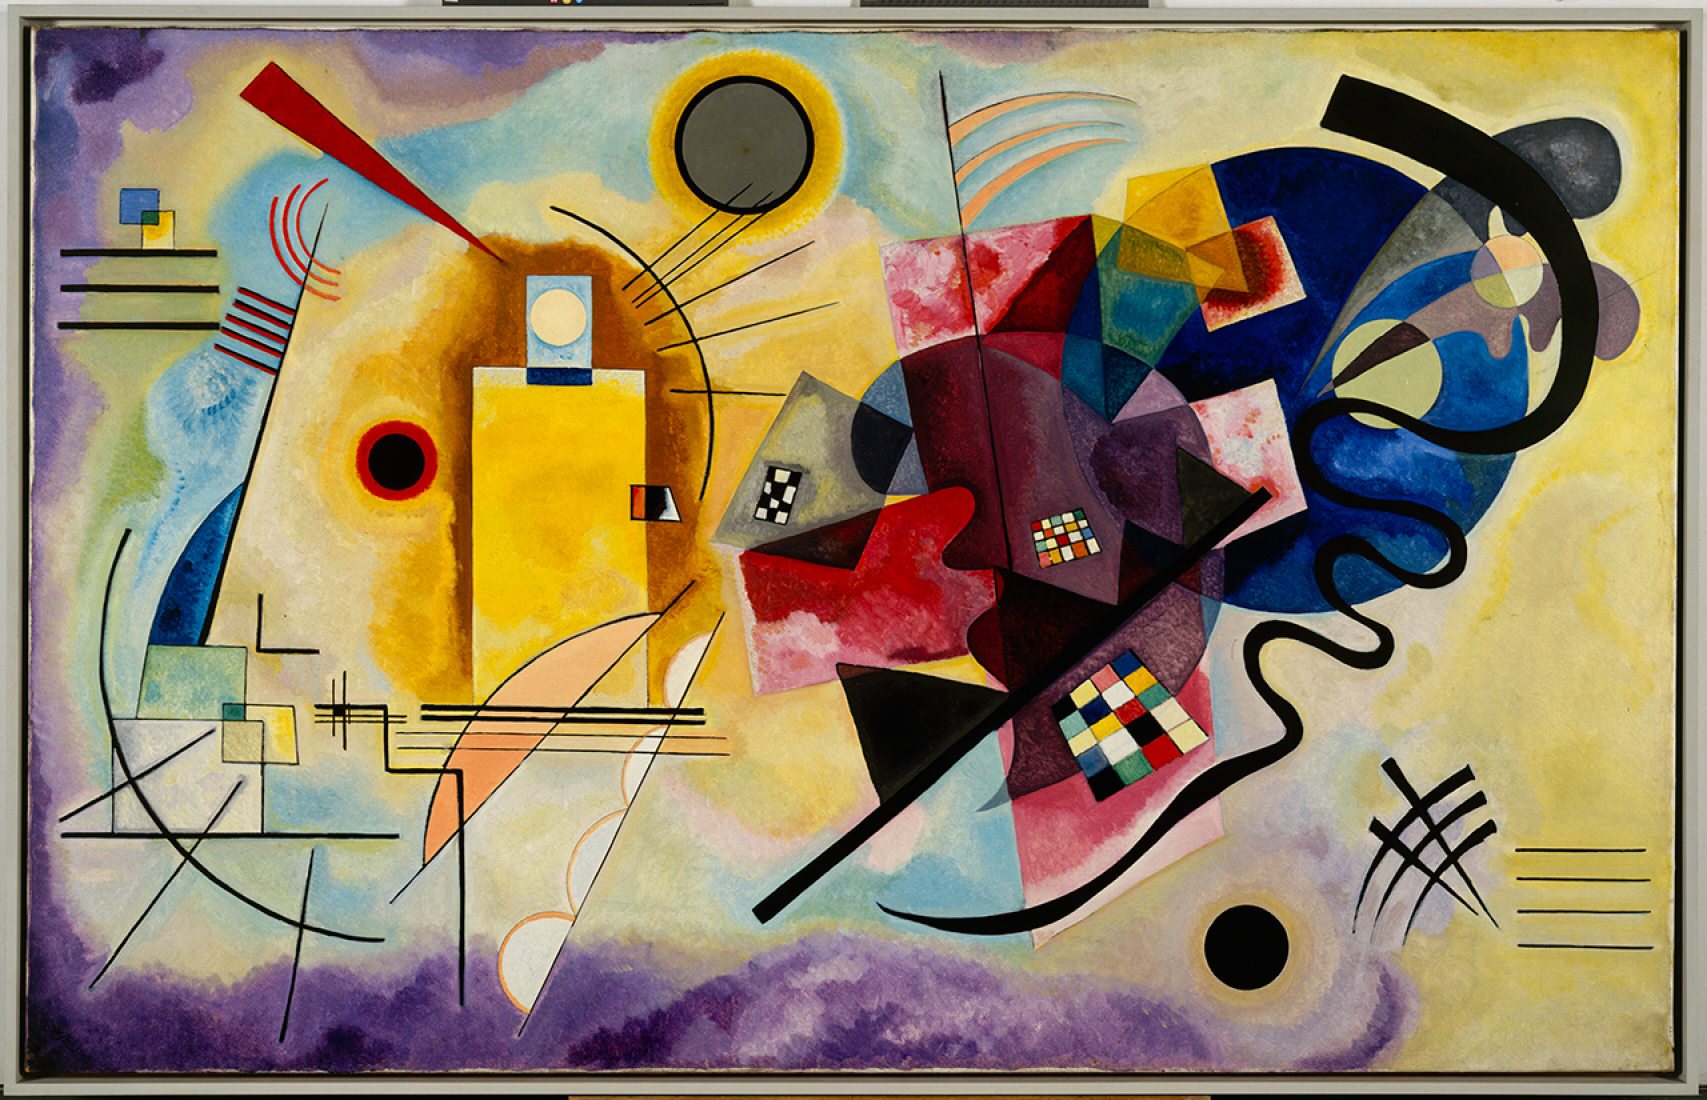 Gelb-Rot-Blau (Yellow-red-blue). Vassily Kandinsky, 1925. Oil on canvas, 128 x 201,5 cm. Collection Centro Pompidou, Musée national d'art moderne, Paris. Legacy of Nina Kandinsky en 1981. © Vassily Kandinsky, VEGAP, Madrid, 2015.